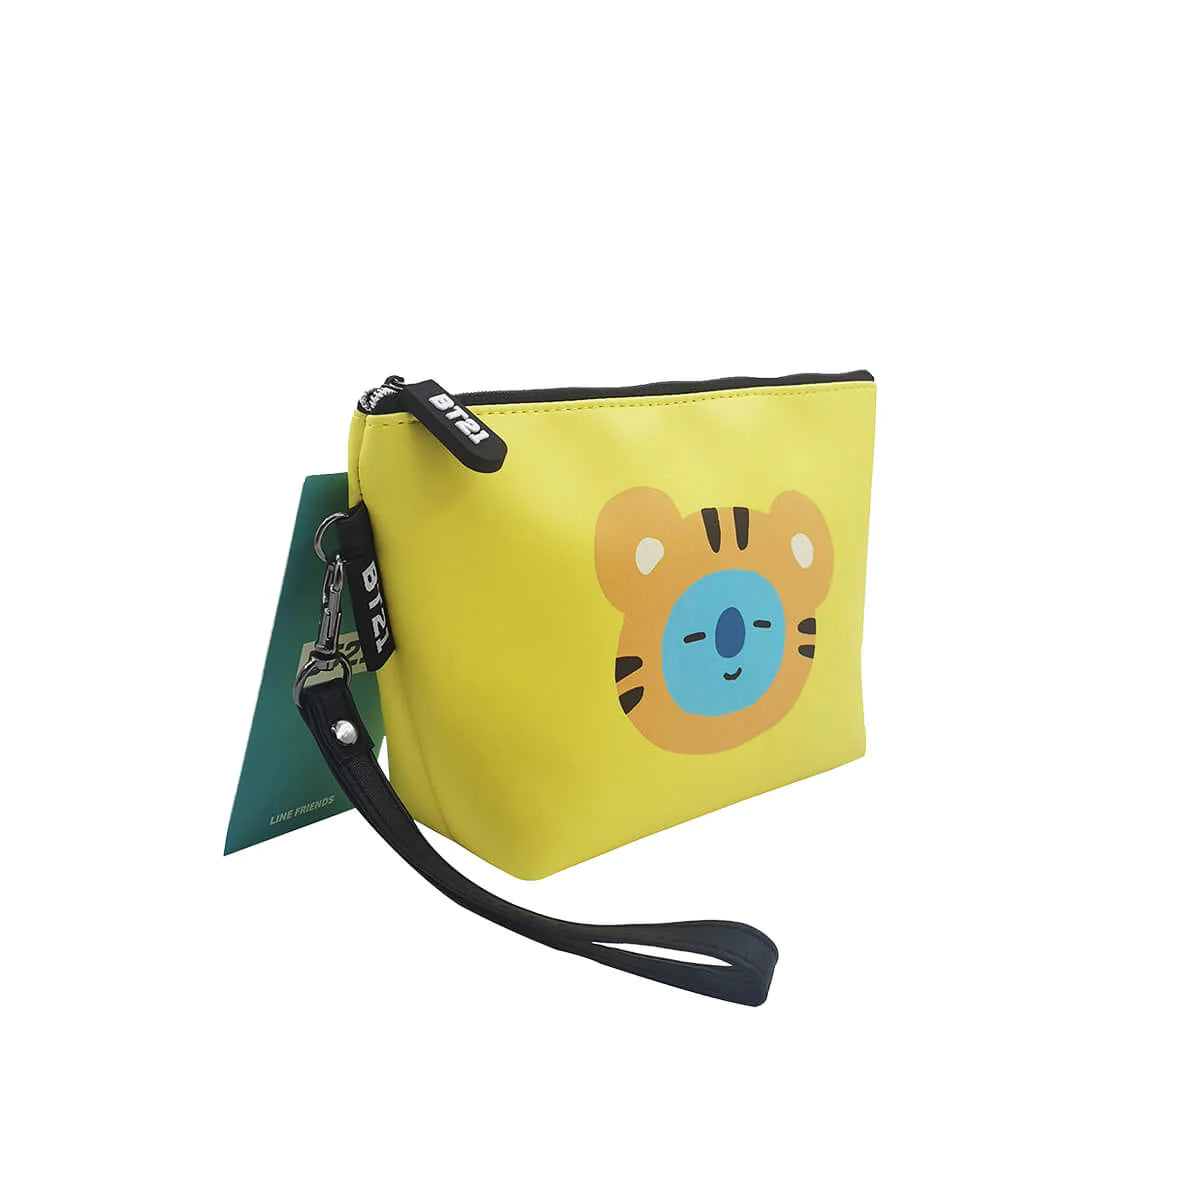 BT21 COSMETIC POUCH